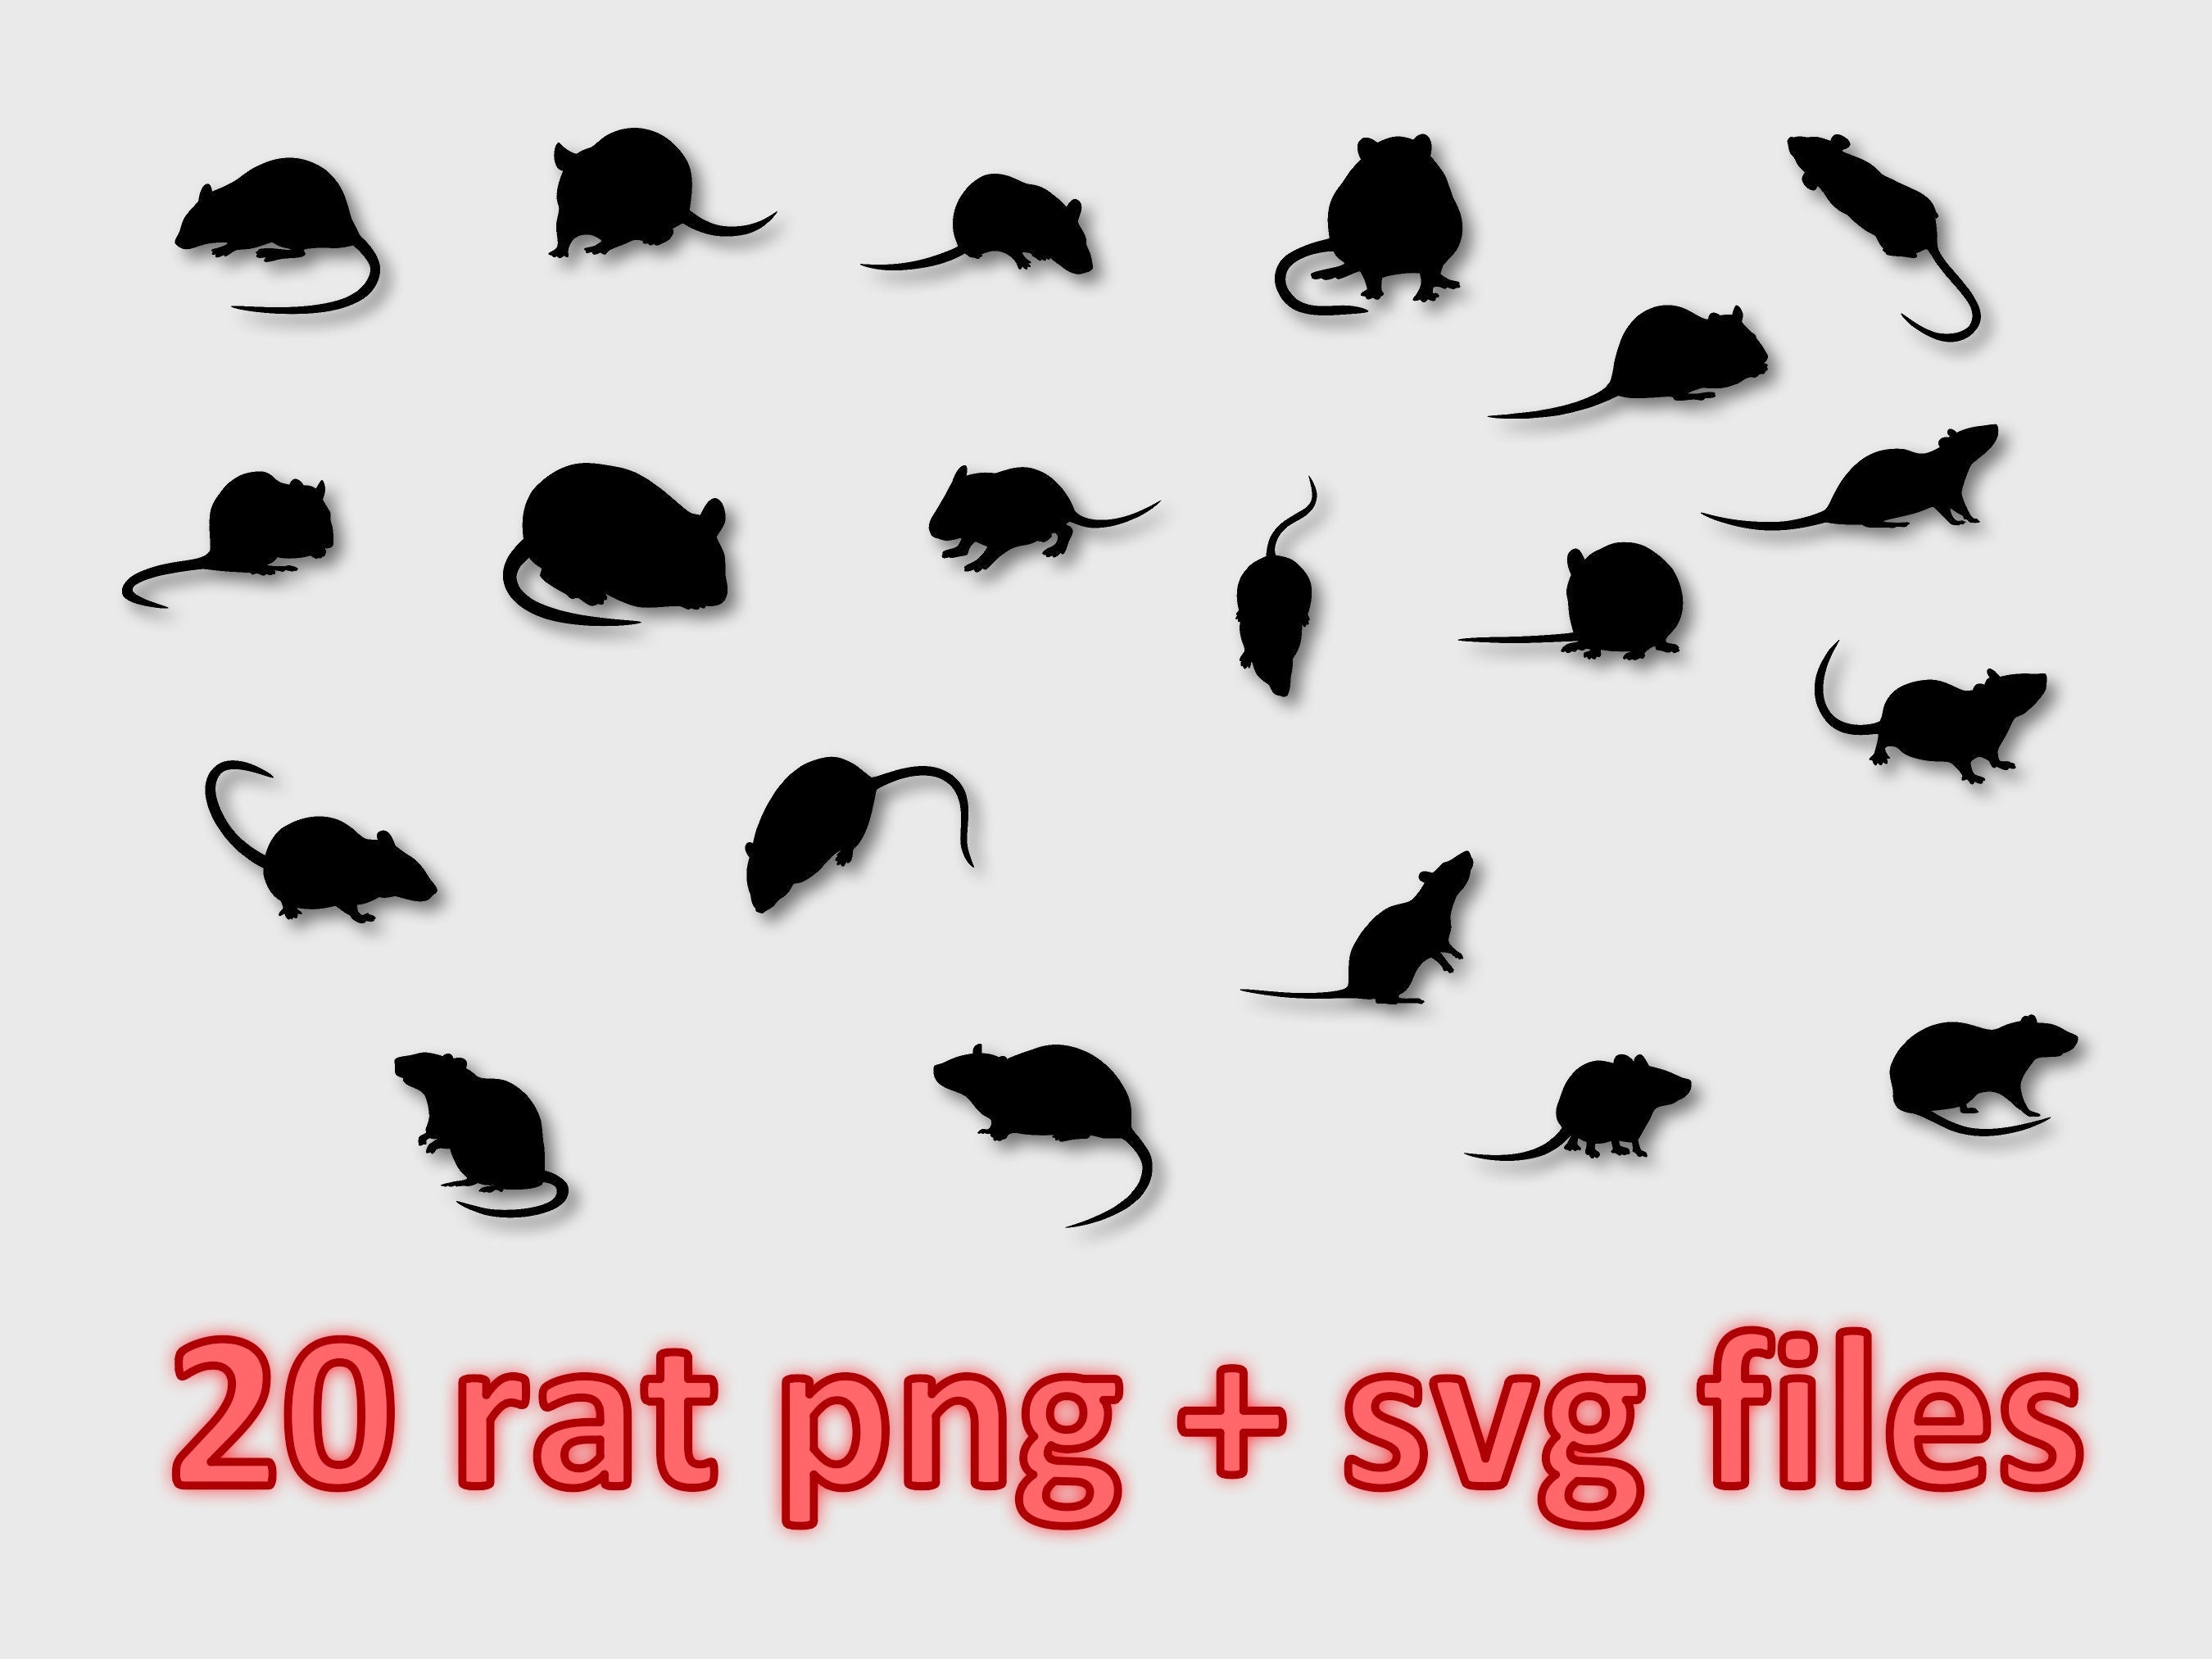 Rat Silhouettes Digital Dowload Png And Svg Files For Etsy